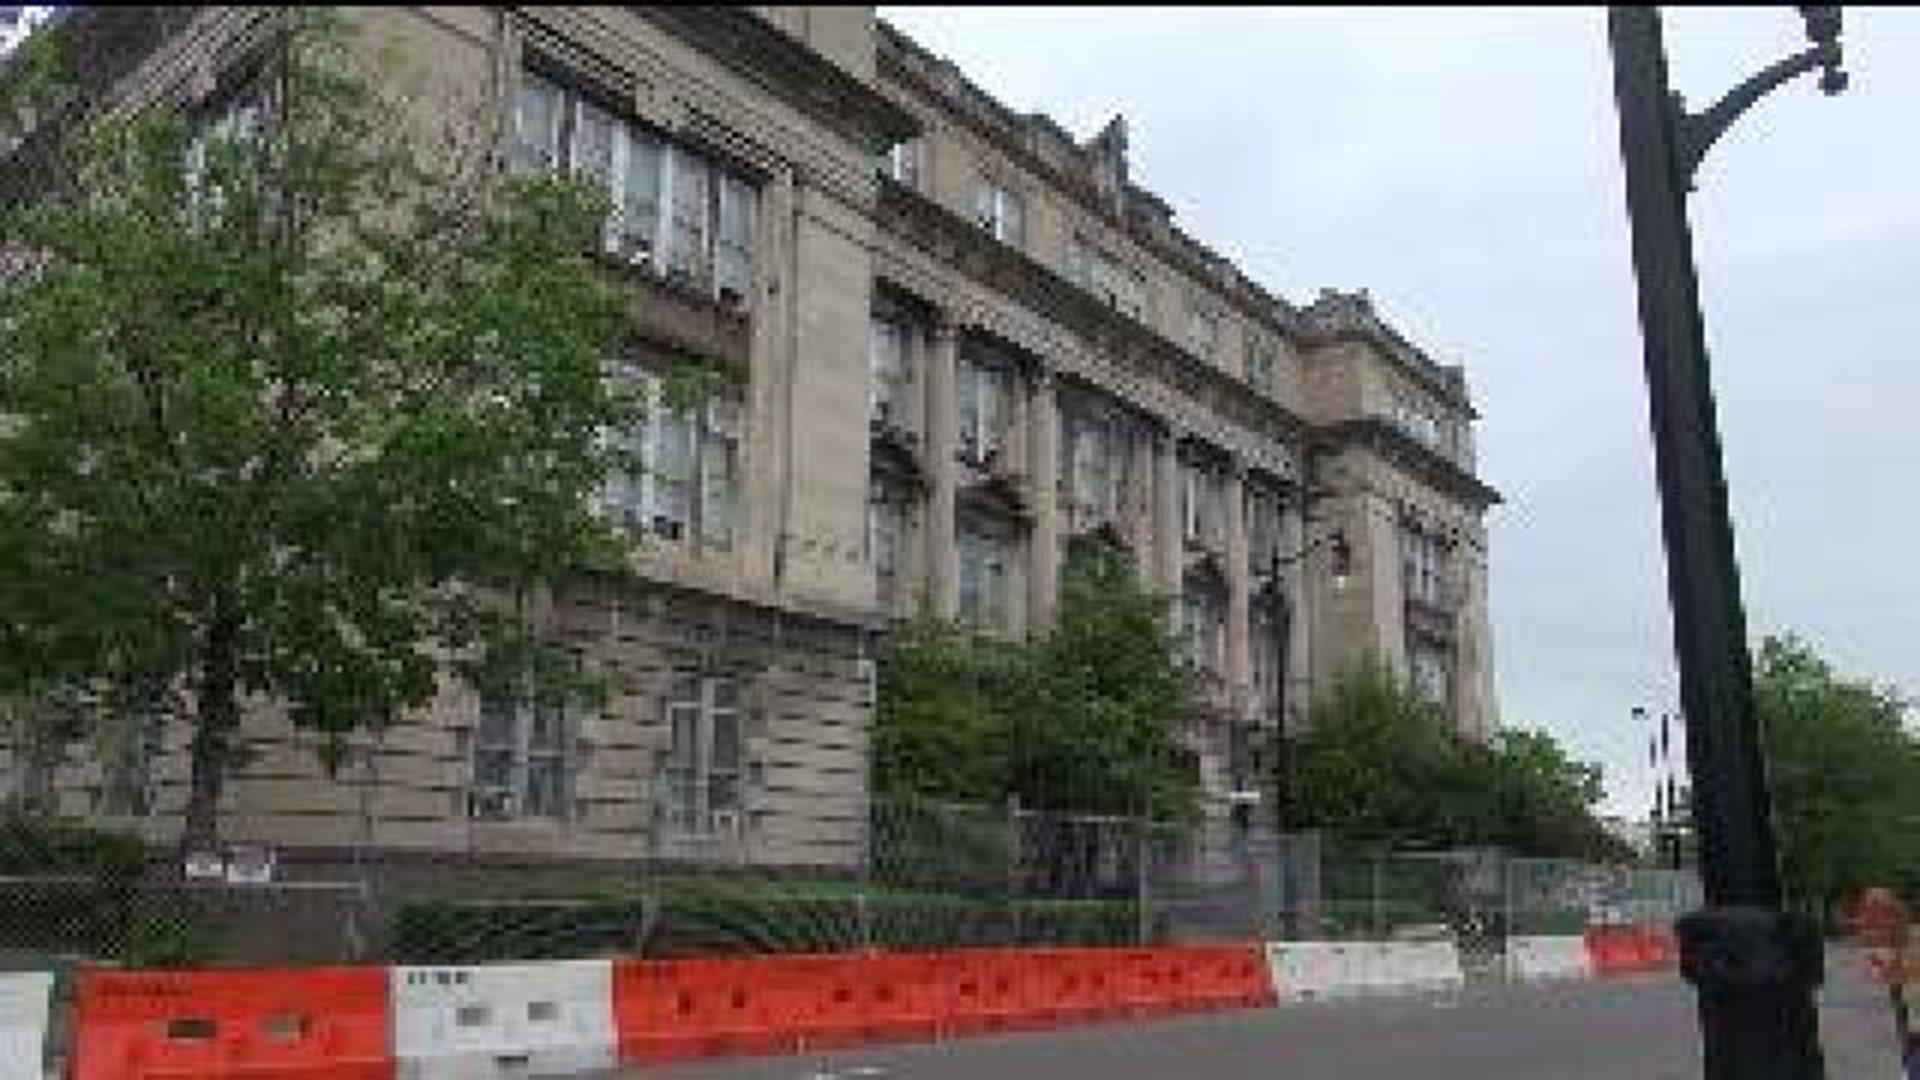 School Administrators Search for Missing Scaffolding